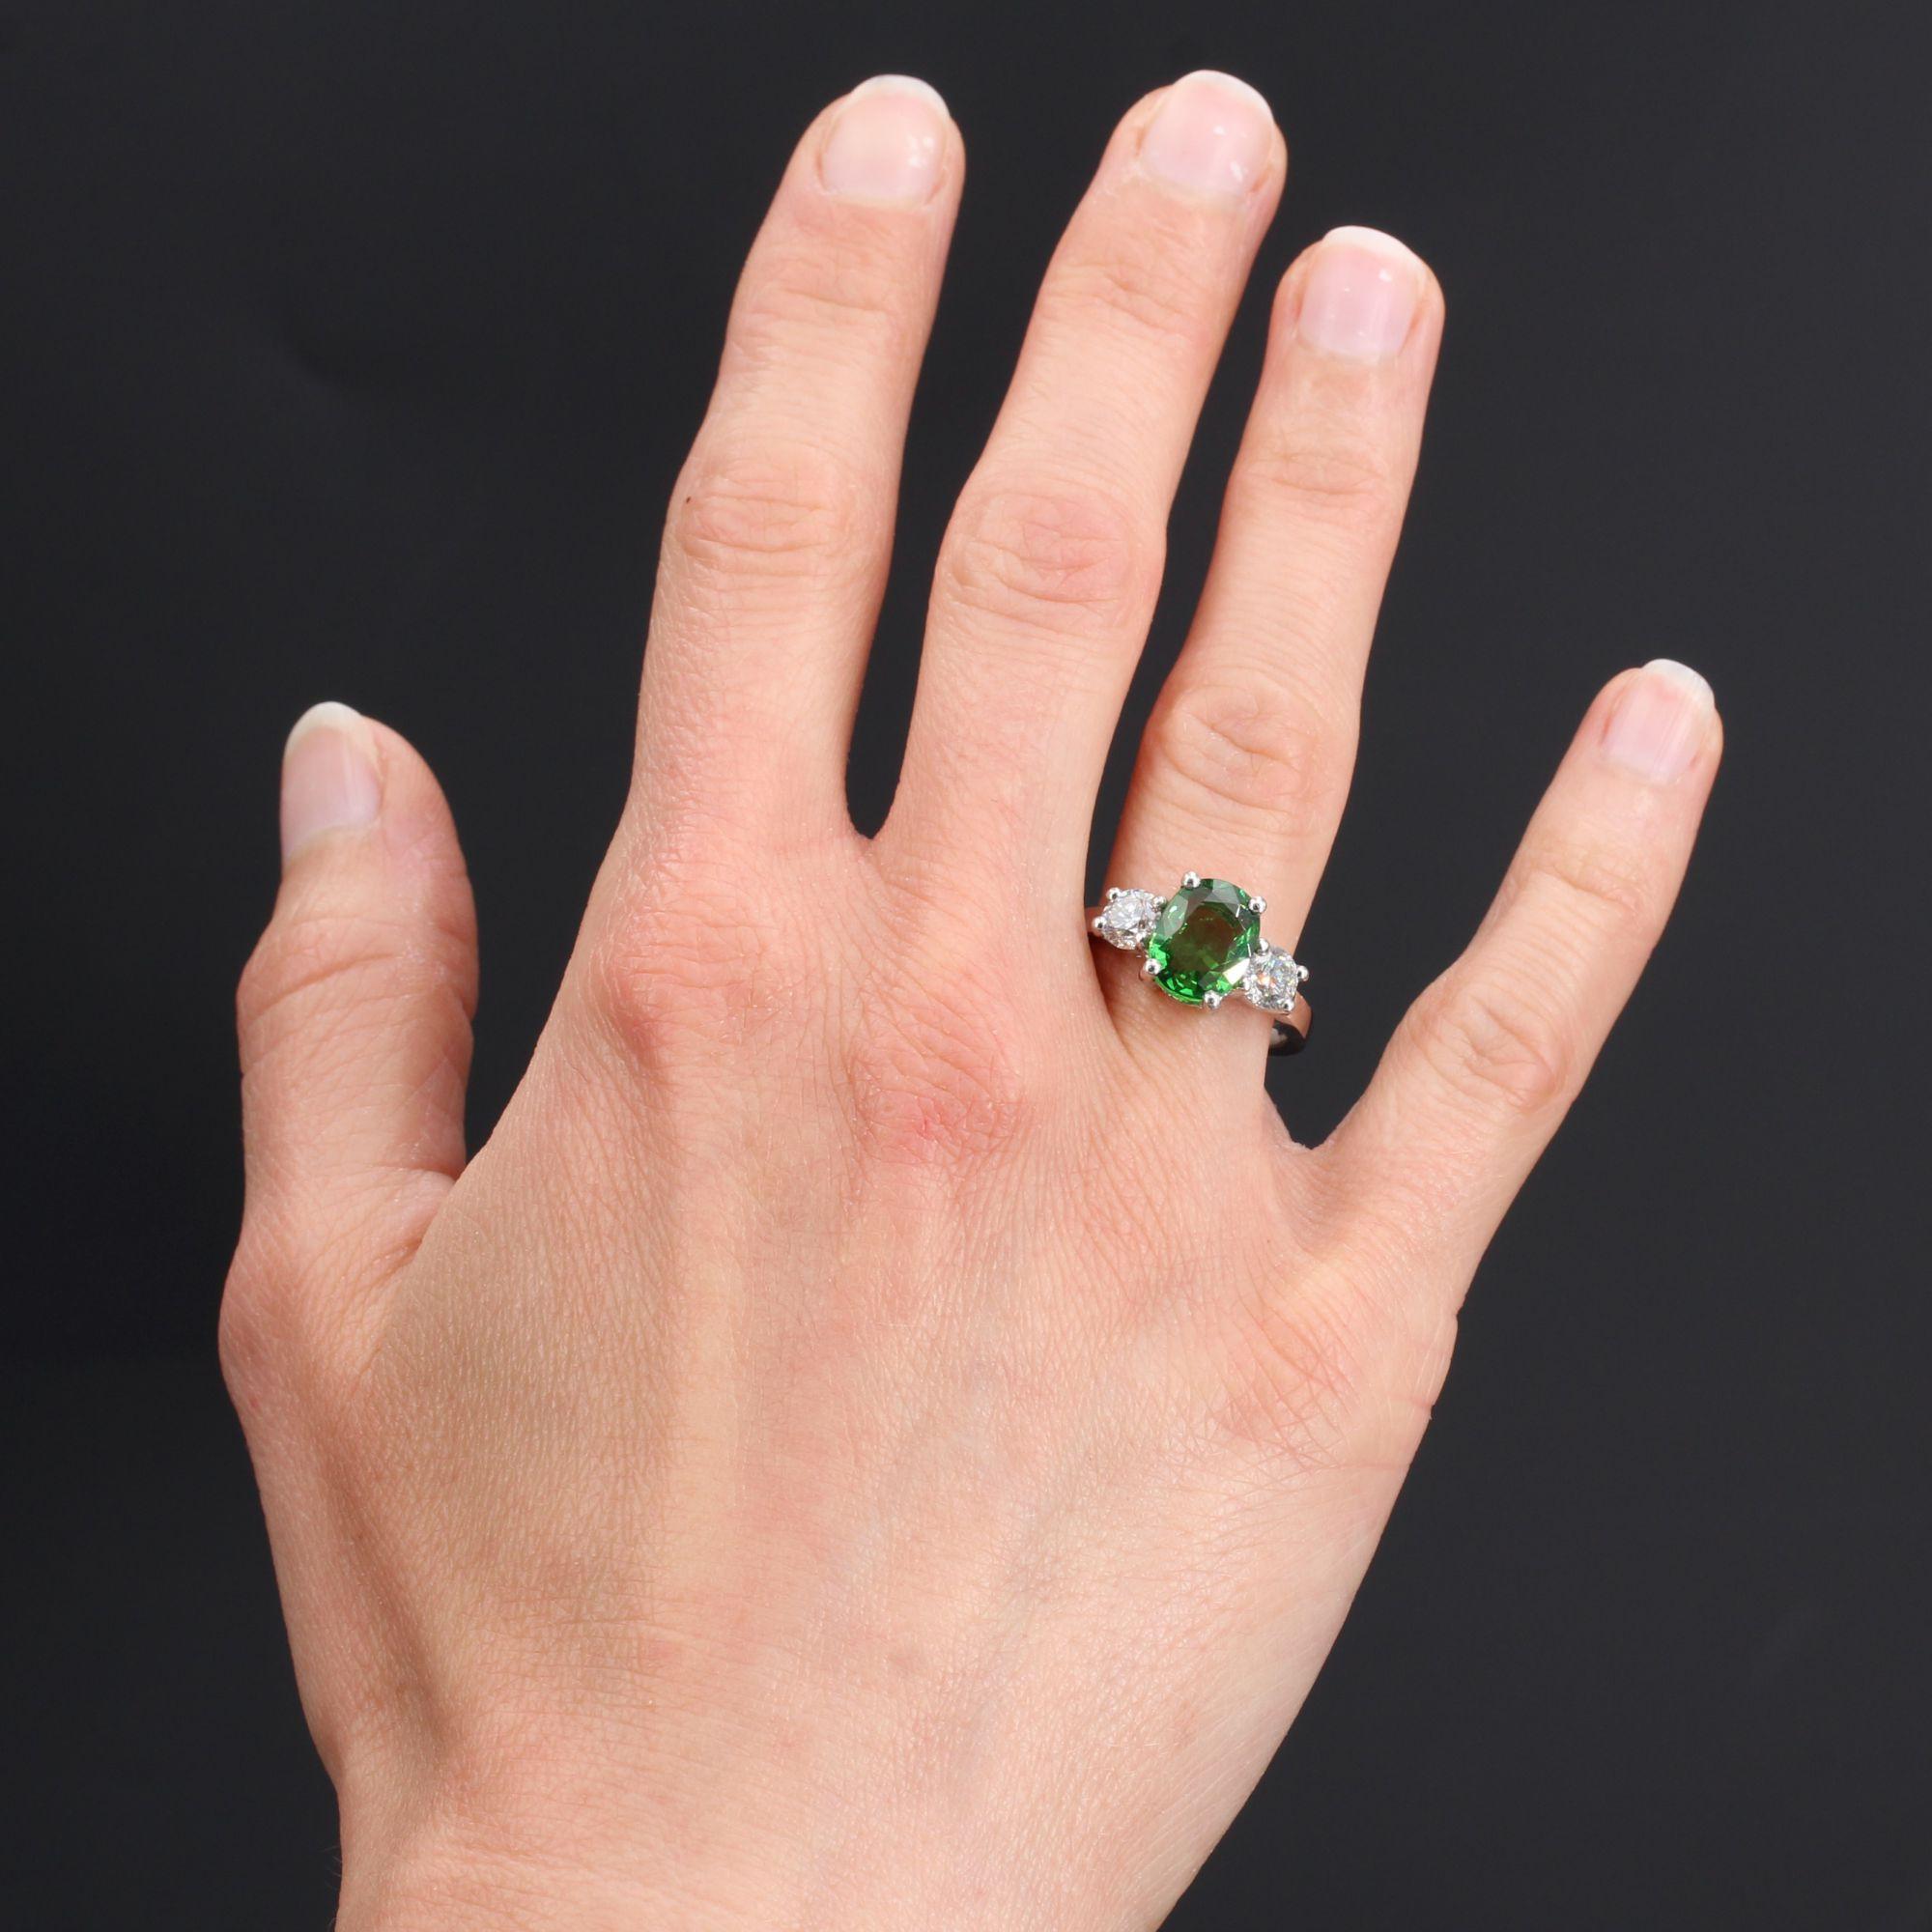 Ring in platinum, dog head hallmark.
This modern platinum ring is set with 4 claws on its top, with an oval tsavorite green garnet supported by 2 modern brilliant-cut diamonds each set with 4 claws.
Weight of the garnet : about 3.06 carats, total